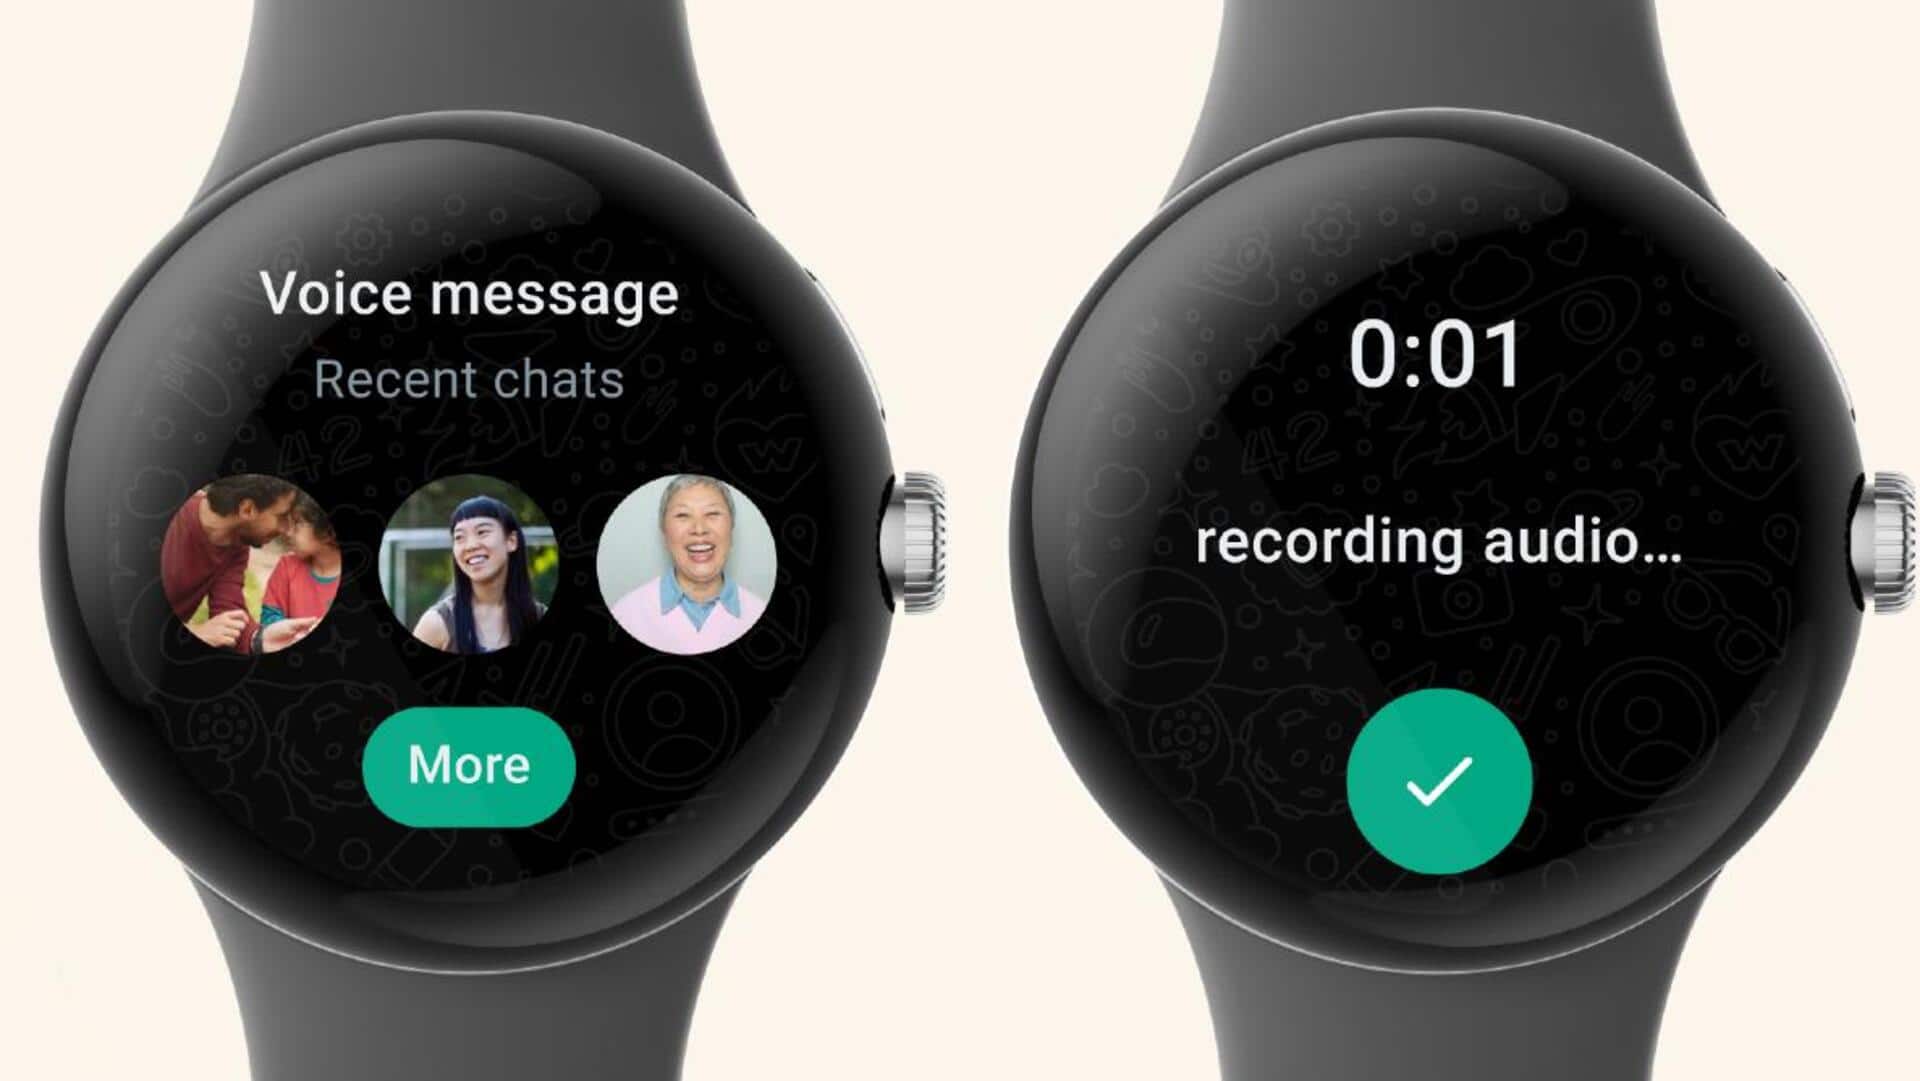 You can now use WhatsApp on your WearOS smartwatch